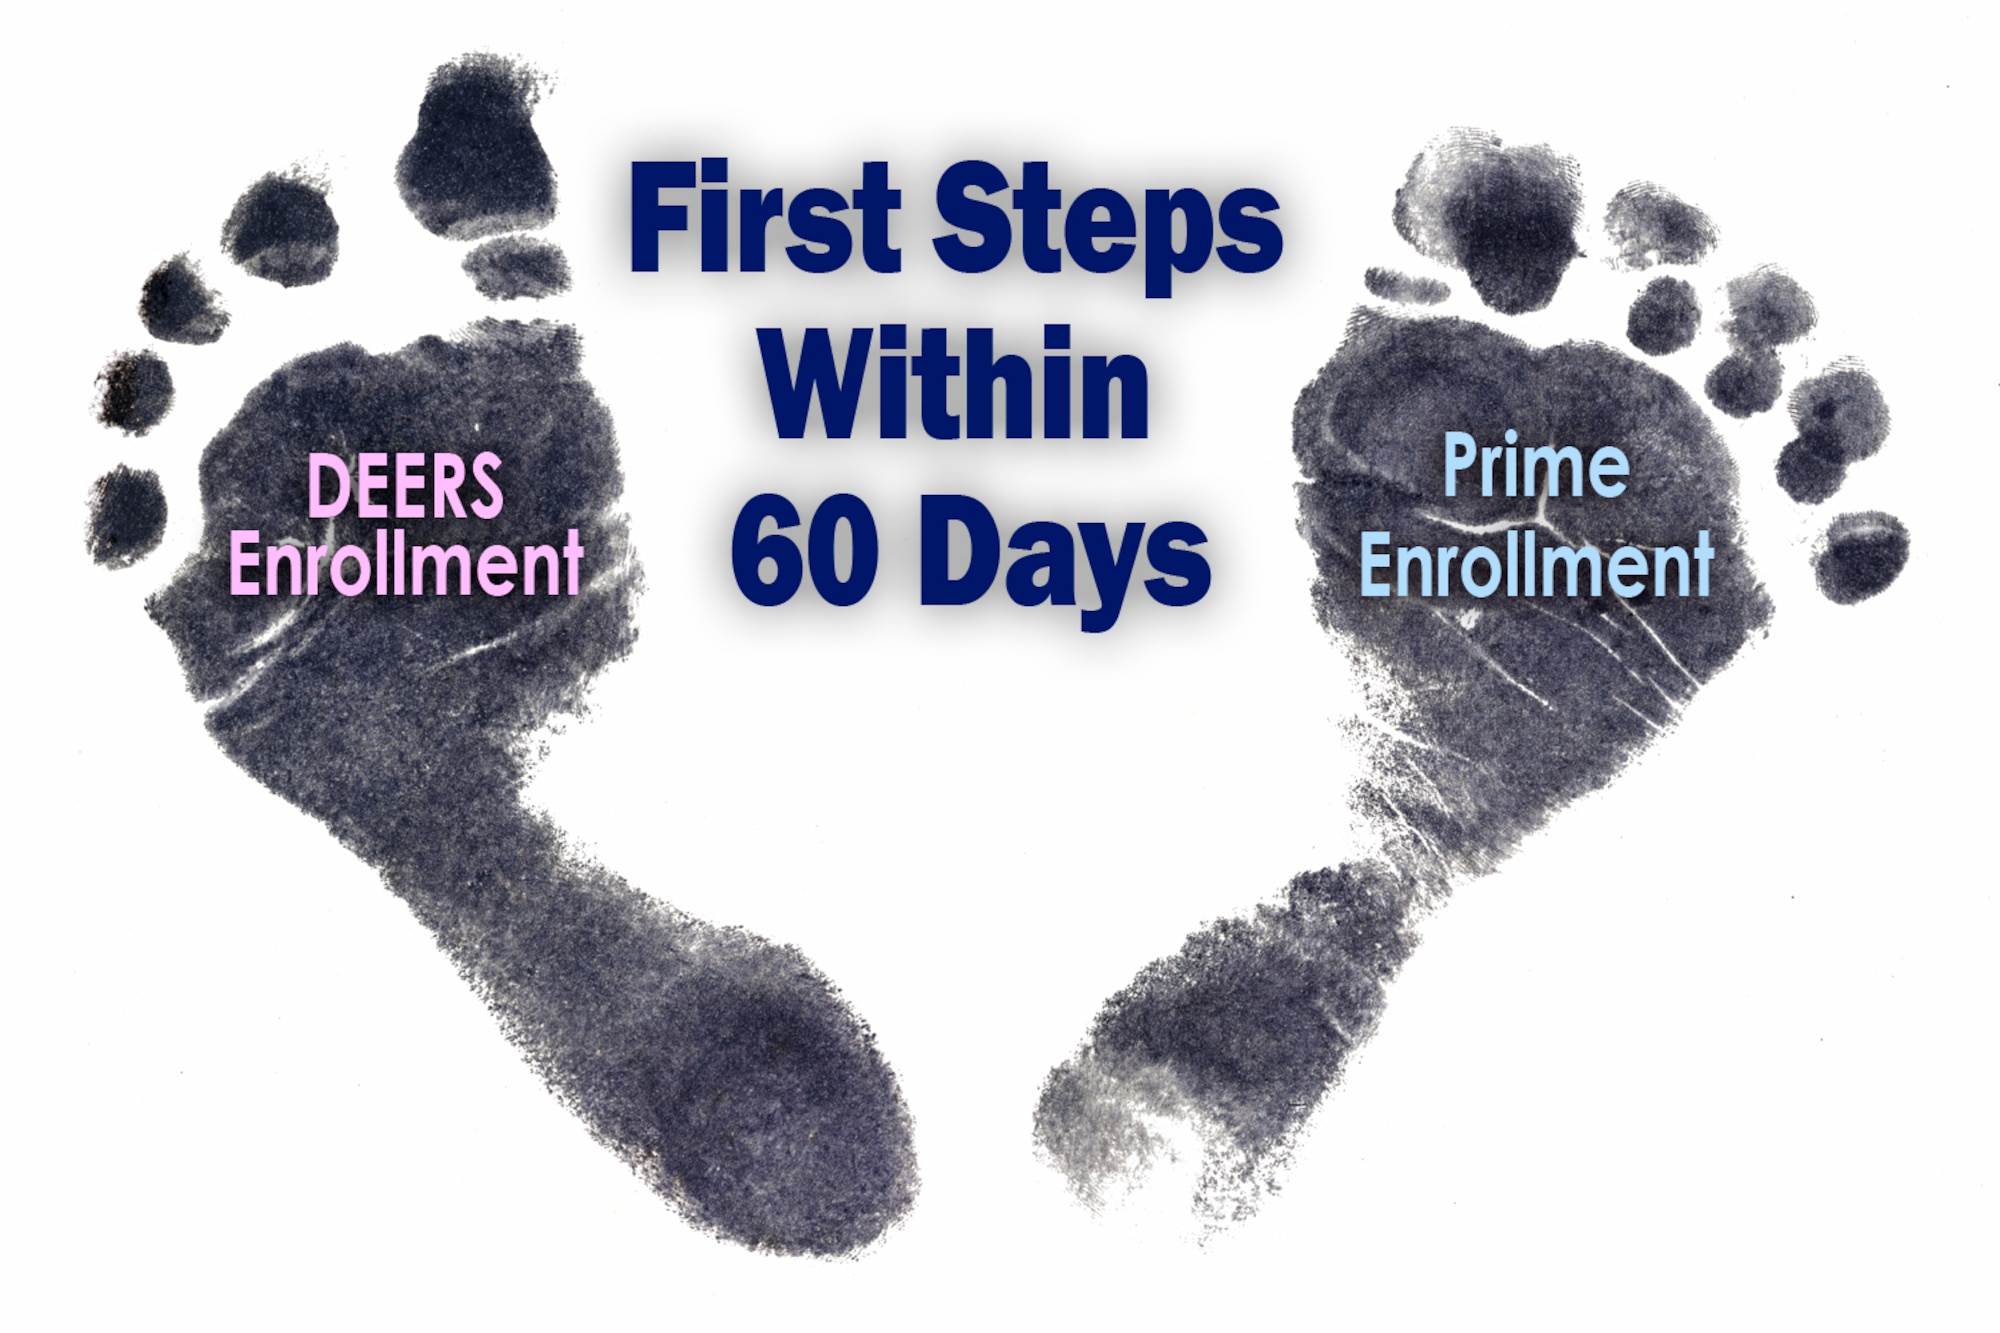 New parents have 60 days from the date of birth or adoption to enroll their child into TRICARE Prime. On the 61st day, a child not enrolled in Prime will automatically be covered by TRICARE Standard. (Courtesy graphic)
